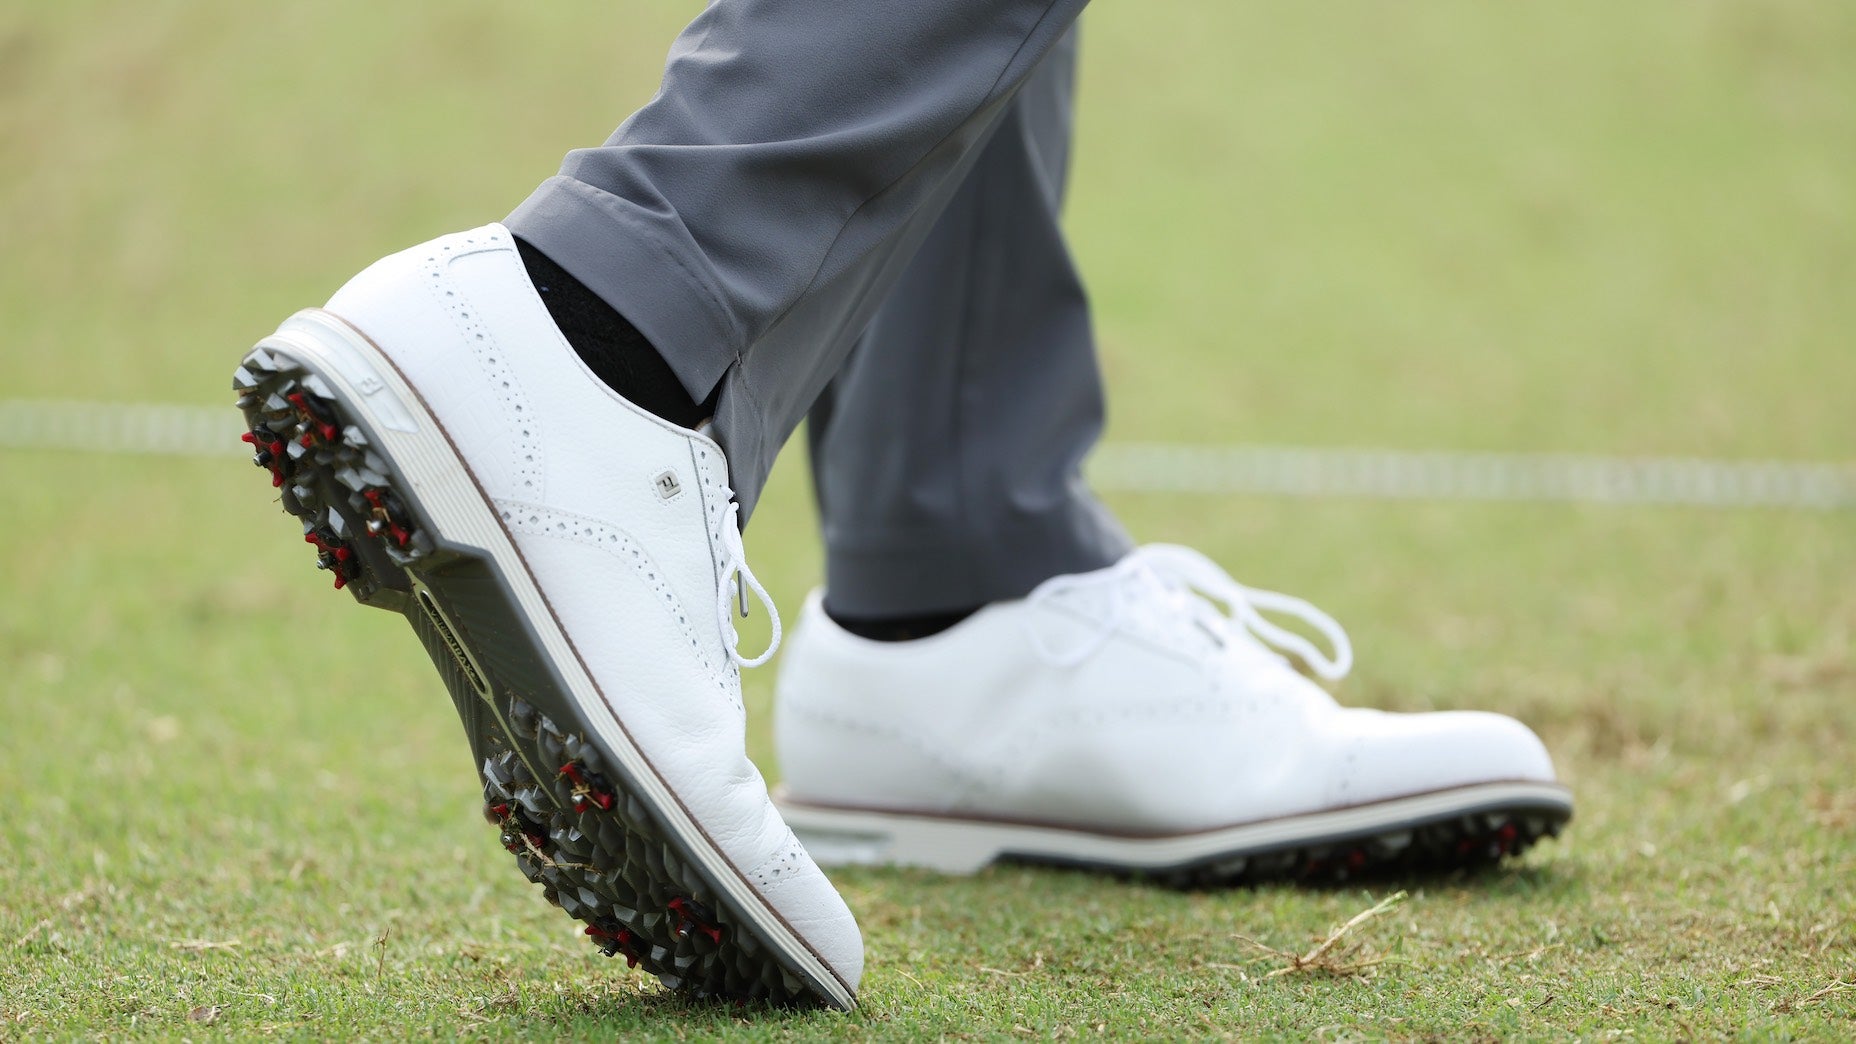 How many tour pros still wear metal spikes?